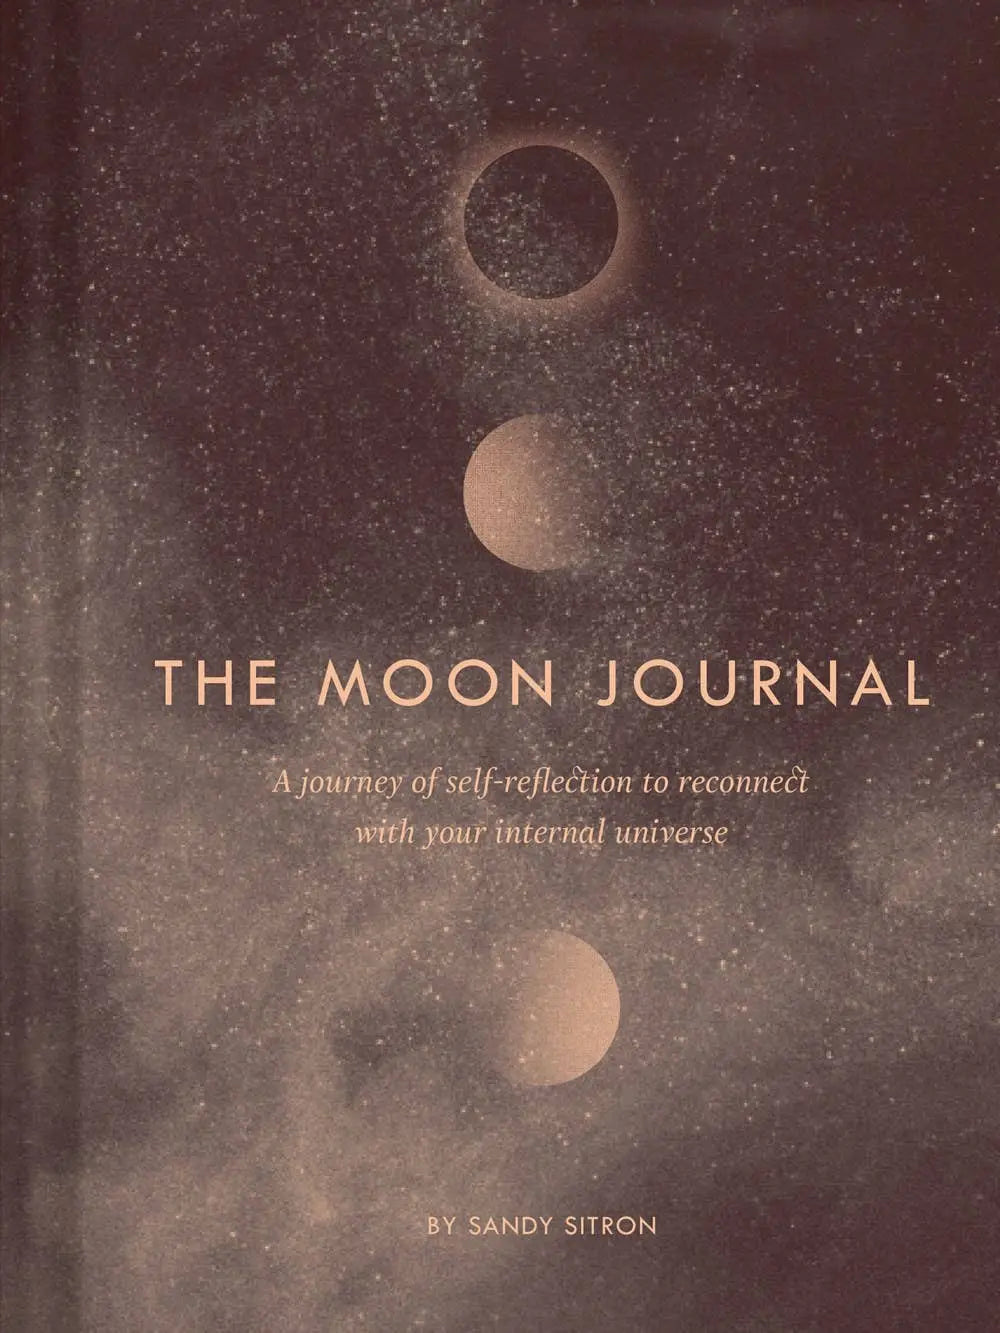 Moon Phase Journal: A Journey of Self-Reflection Microcosm Publishing & Distribution